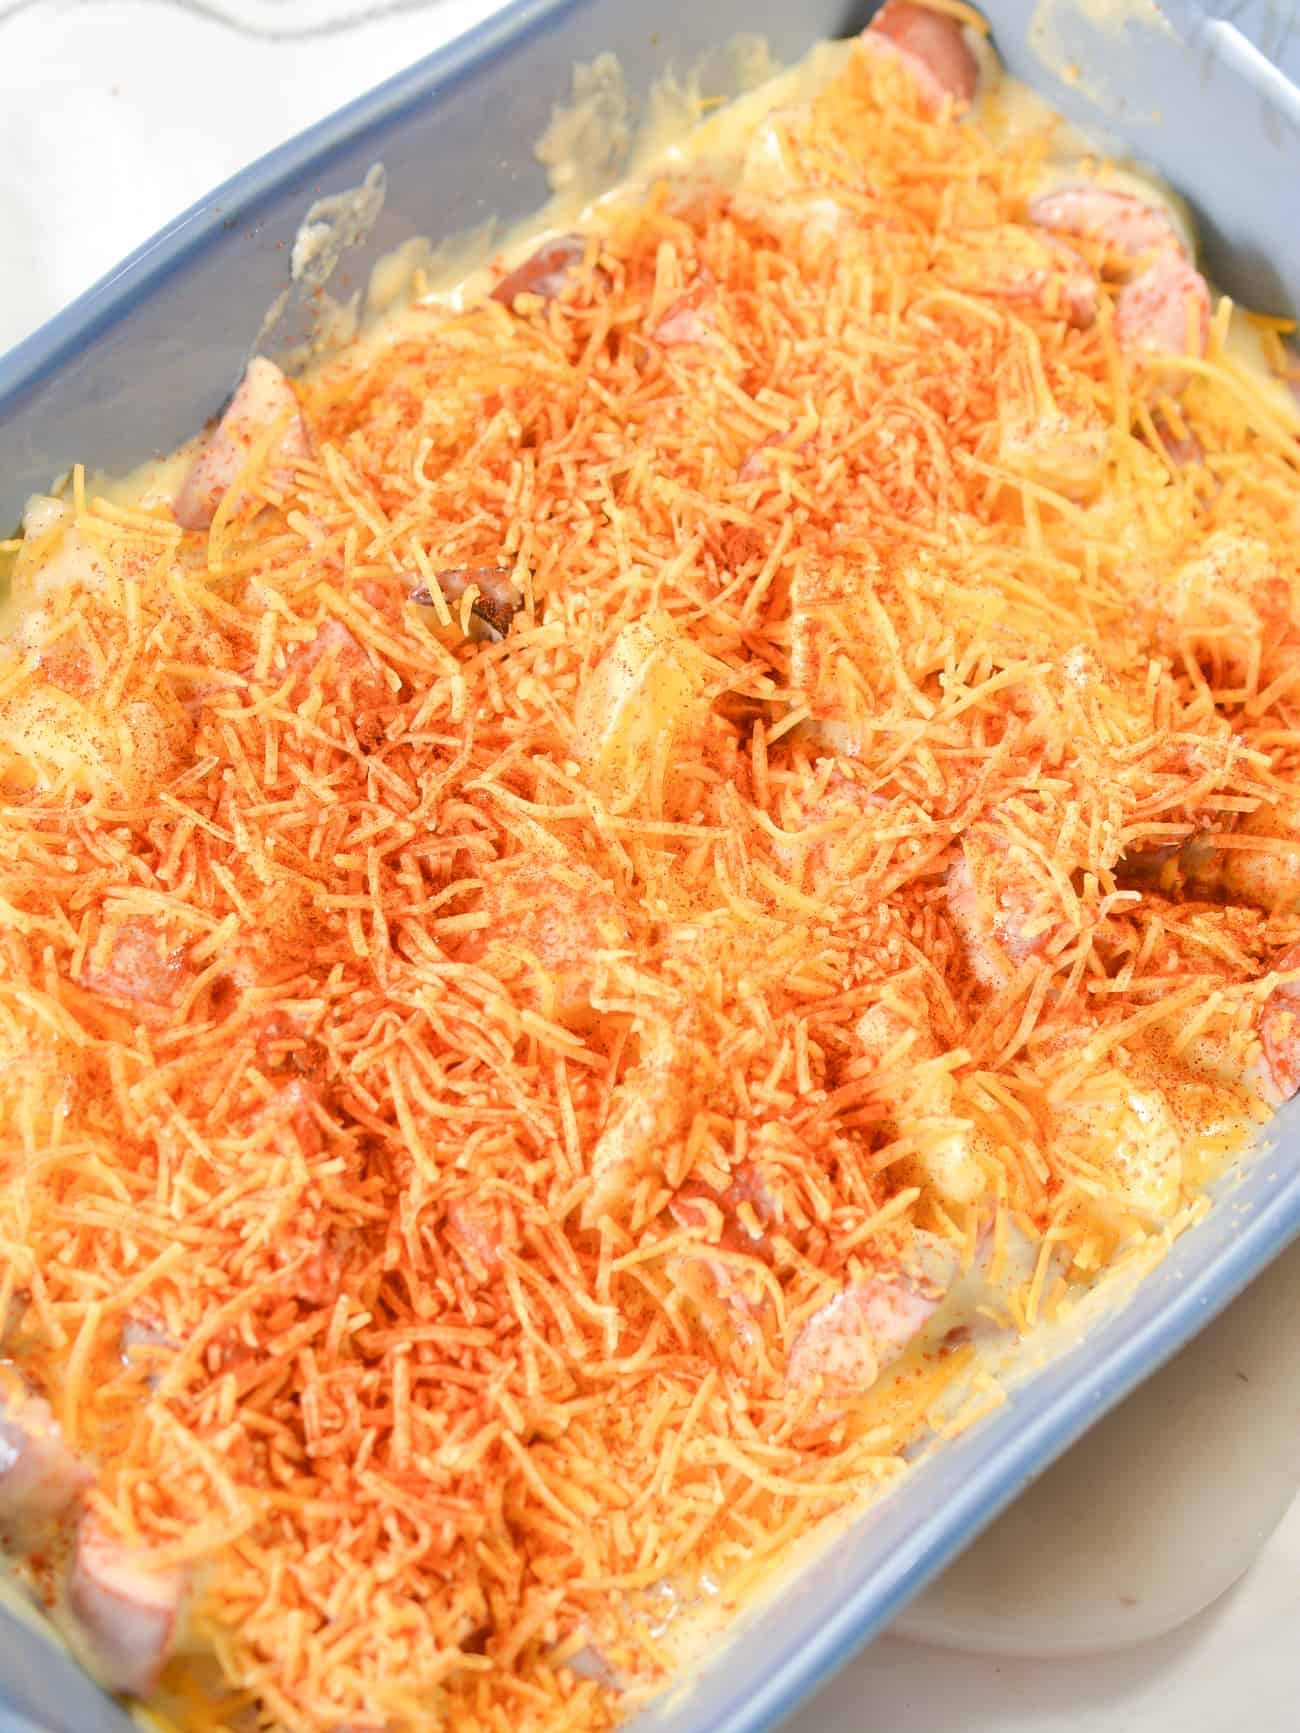 Sprinkle the cheddar cheese and paprika on top.